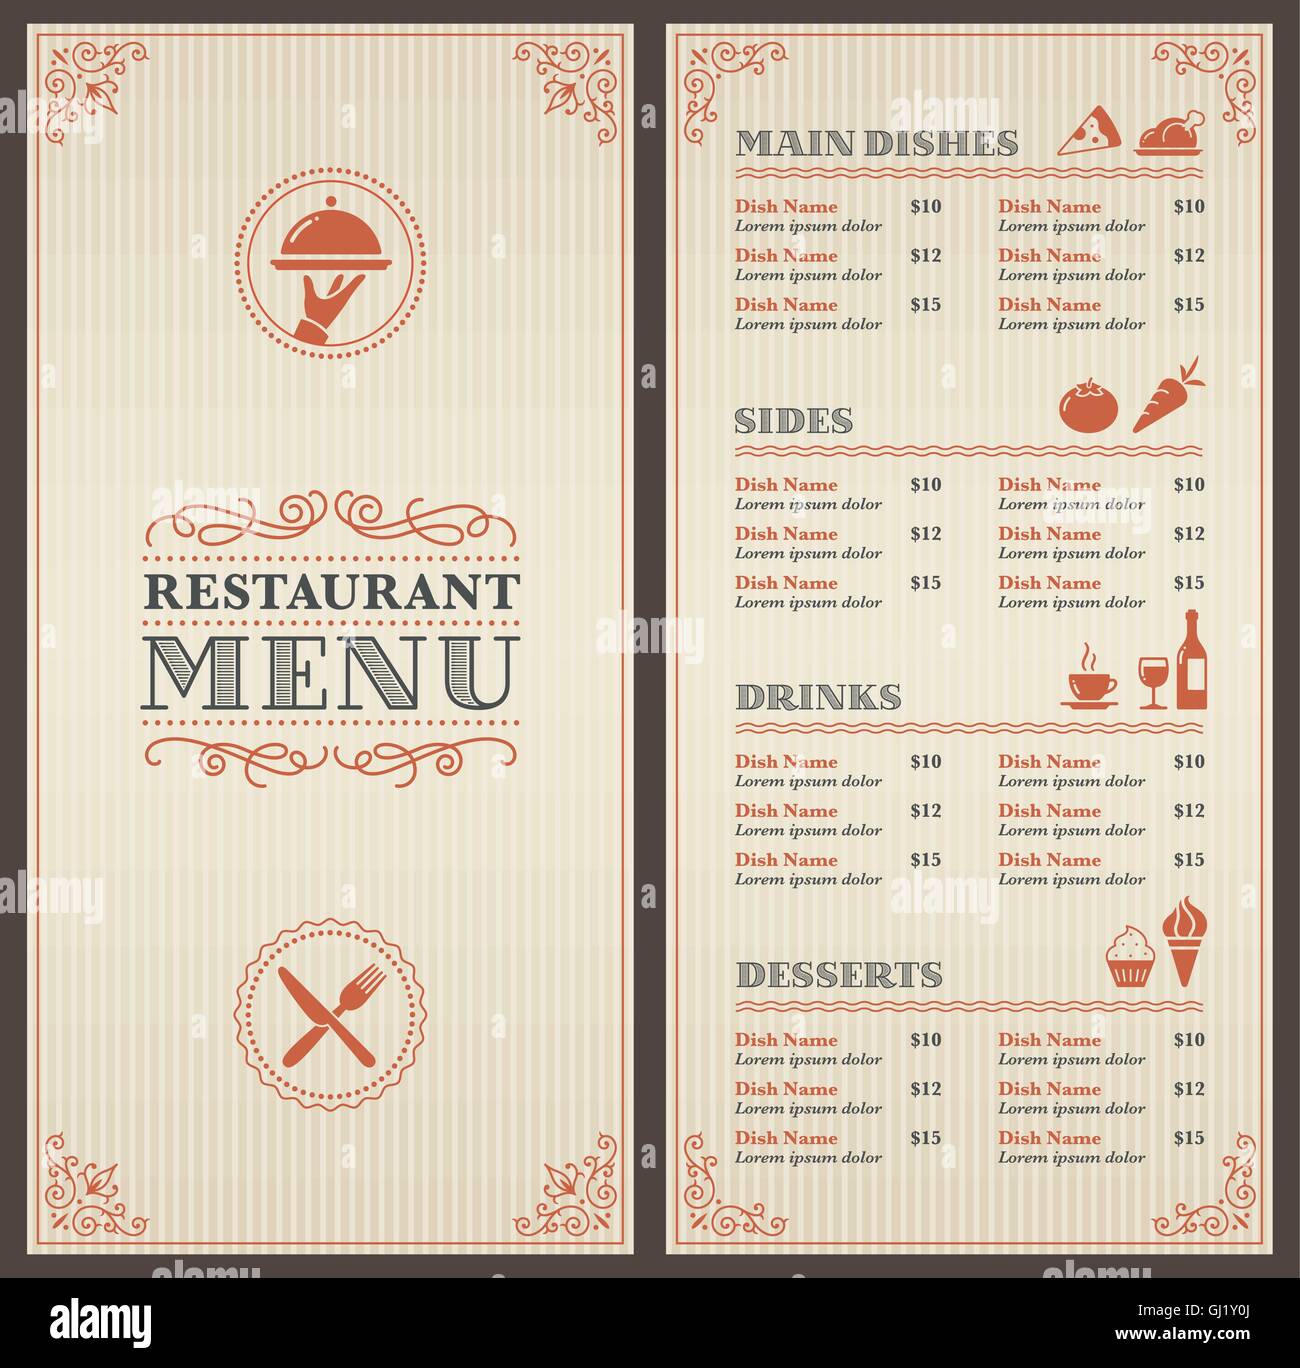 A Classic Restaurant Menu Template with nice Icons in an Elegant Style ...